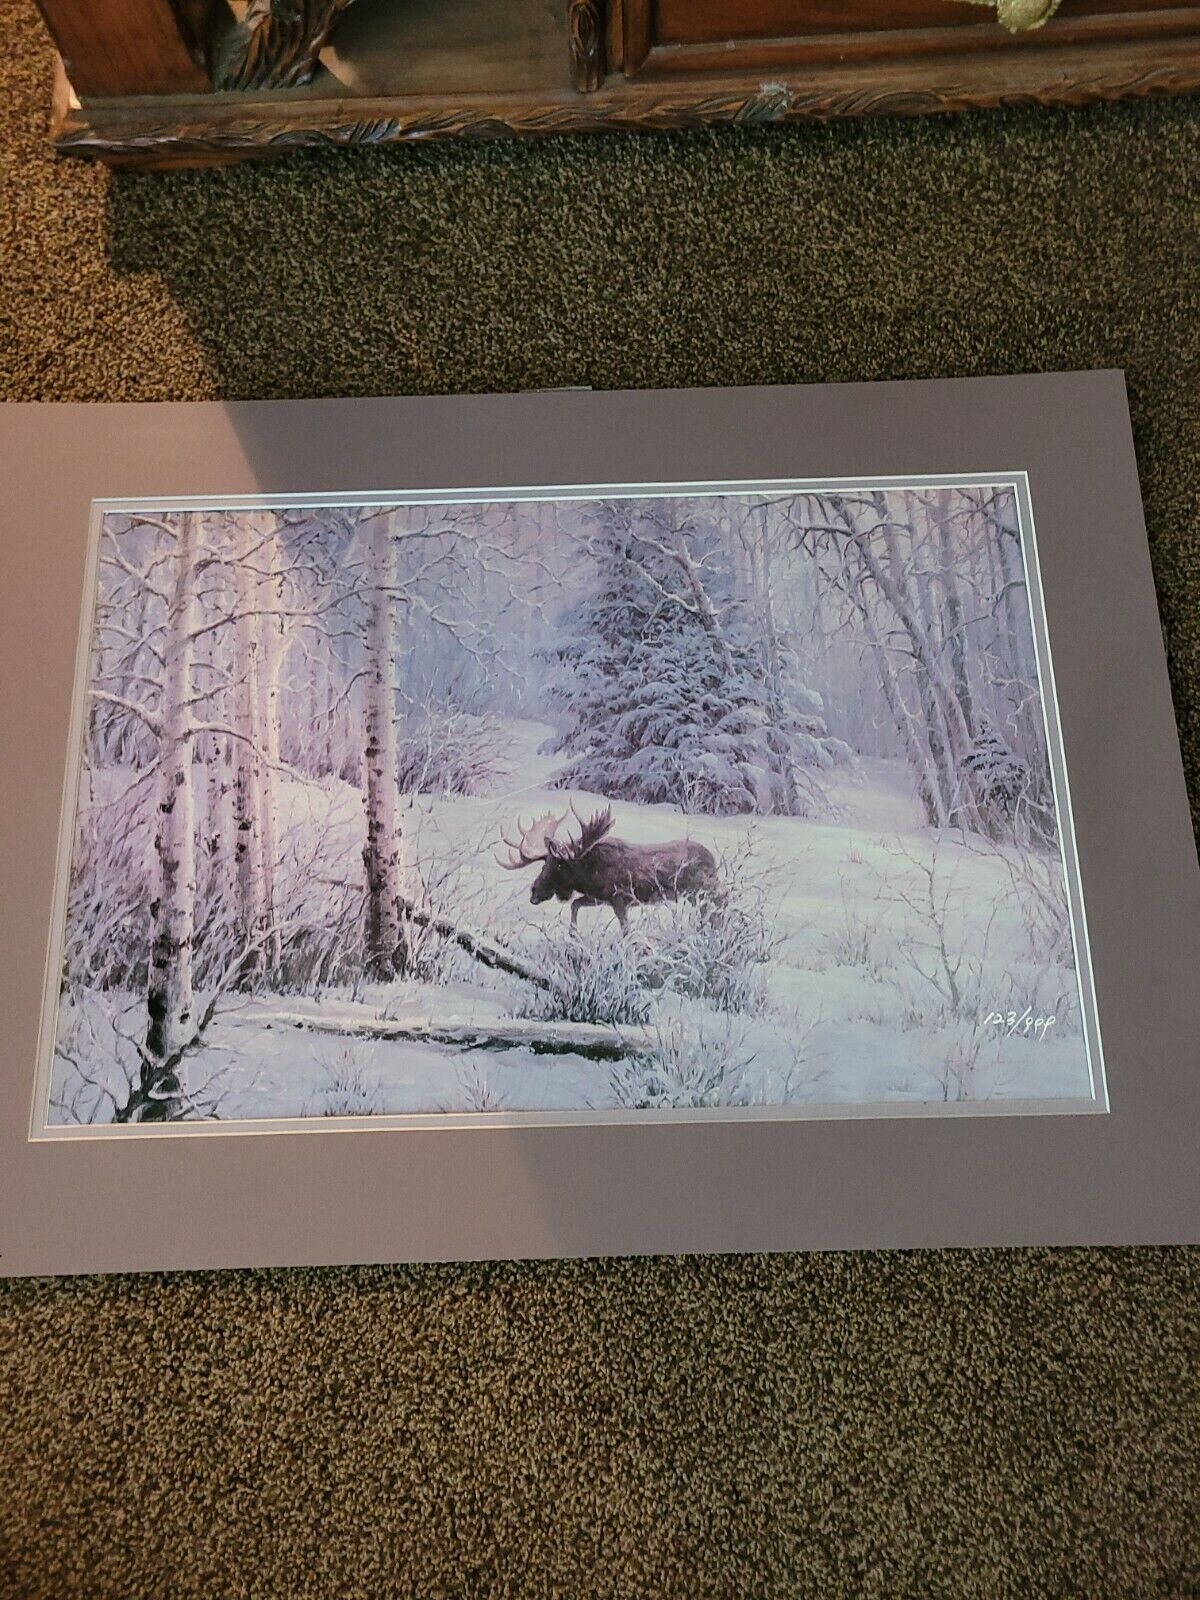 Moose in pink snow #123/999 signed J Henning? 29x21 matted unframed 